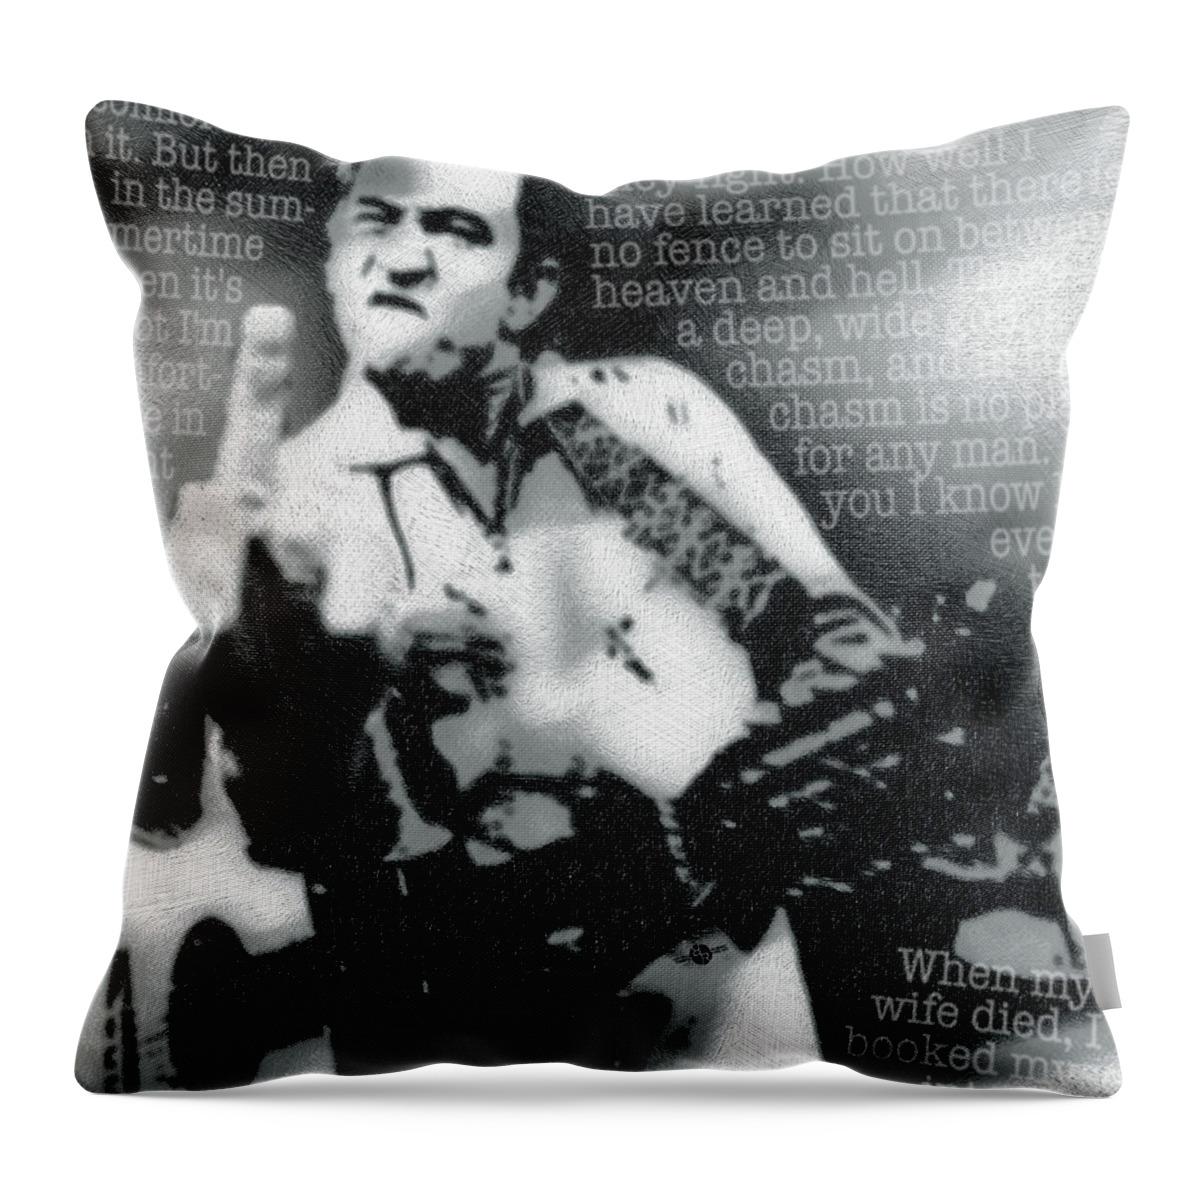 Johnny Cash Throw Pillow featuring the painting Johnny Cash Rebel Vertical by Tony Rubino